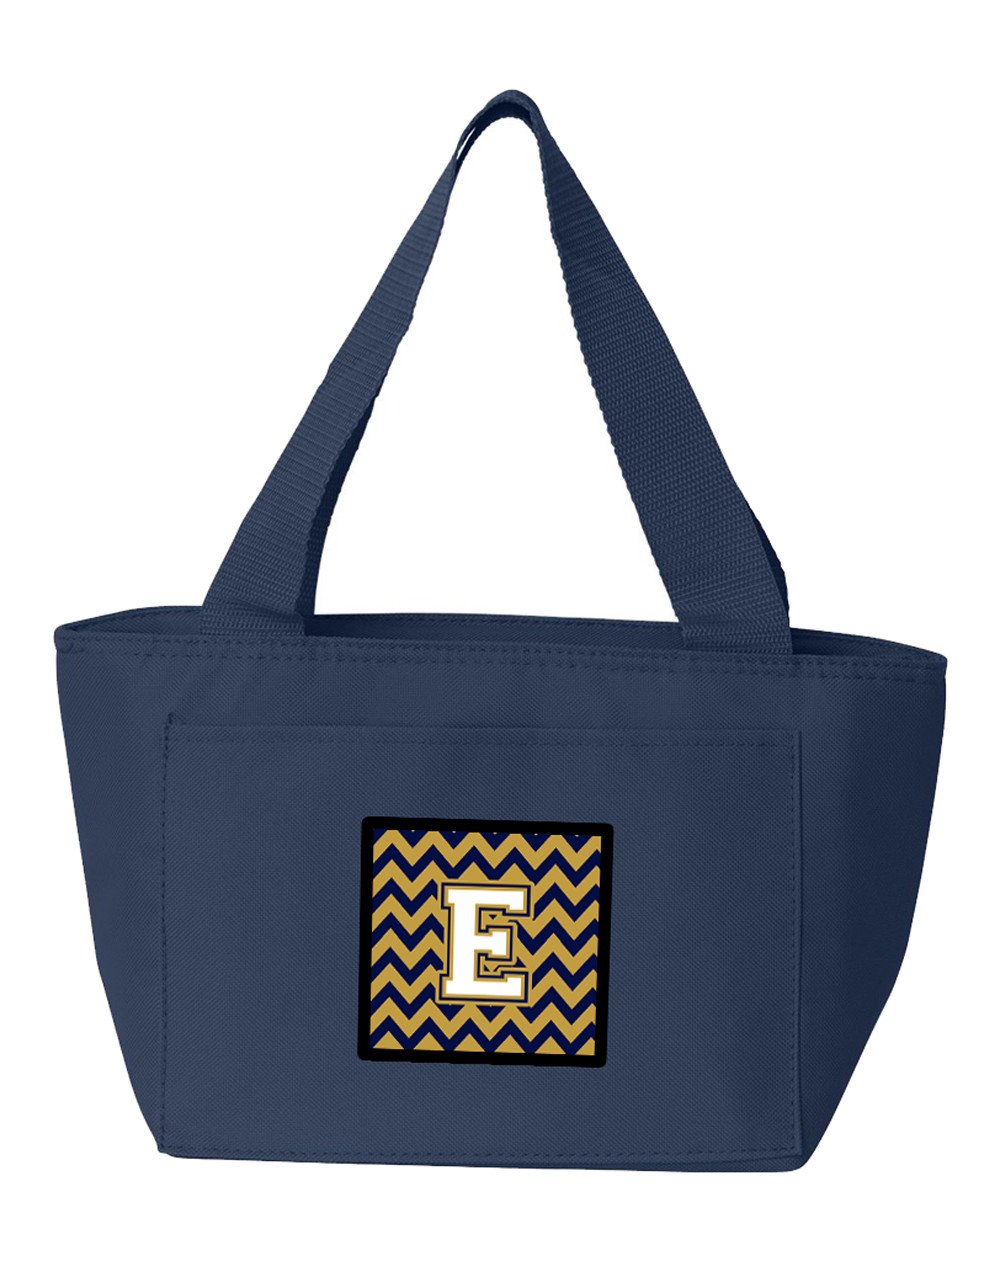 Letter E Chevron Navy Blue and Gold Lunch Bag CJ1057-ENA-8808 by Caroline's Treasures